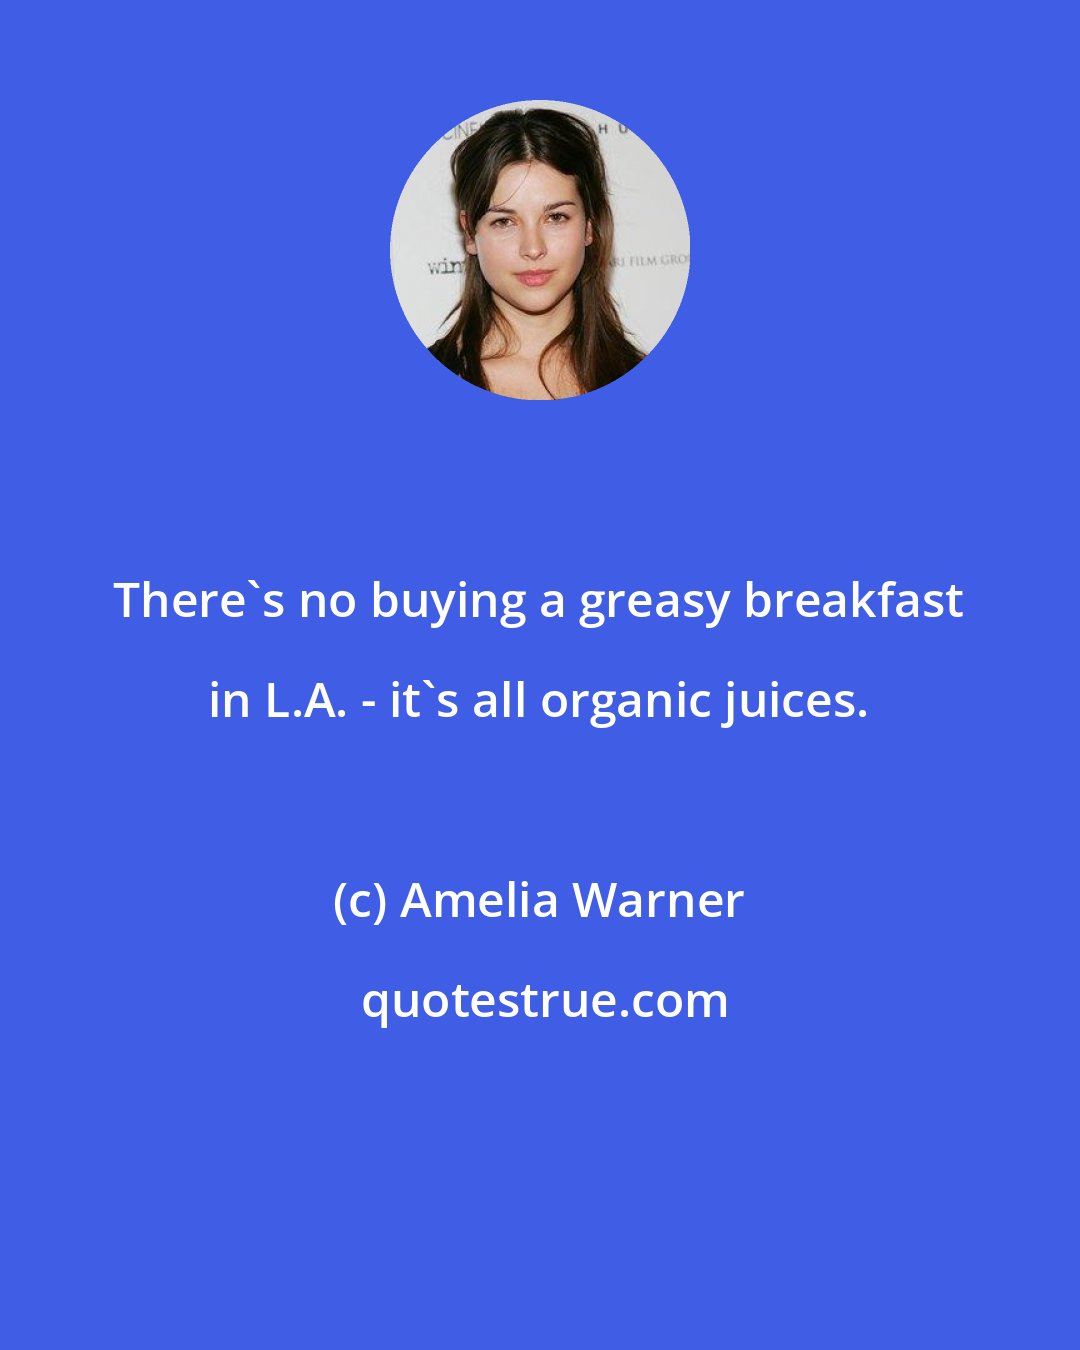 Amelia Warner: There's no buying a greasy breakfast in L.A. - it's all organic juices.